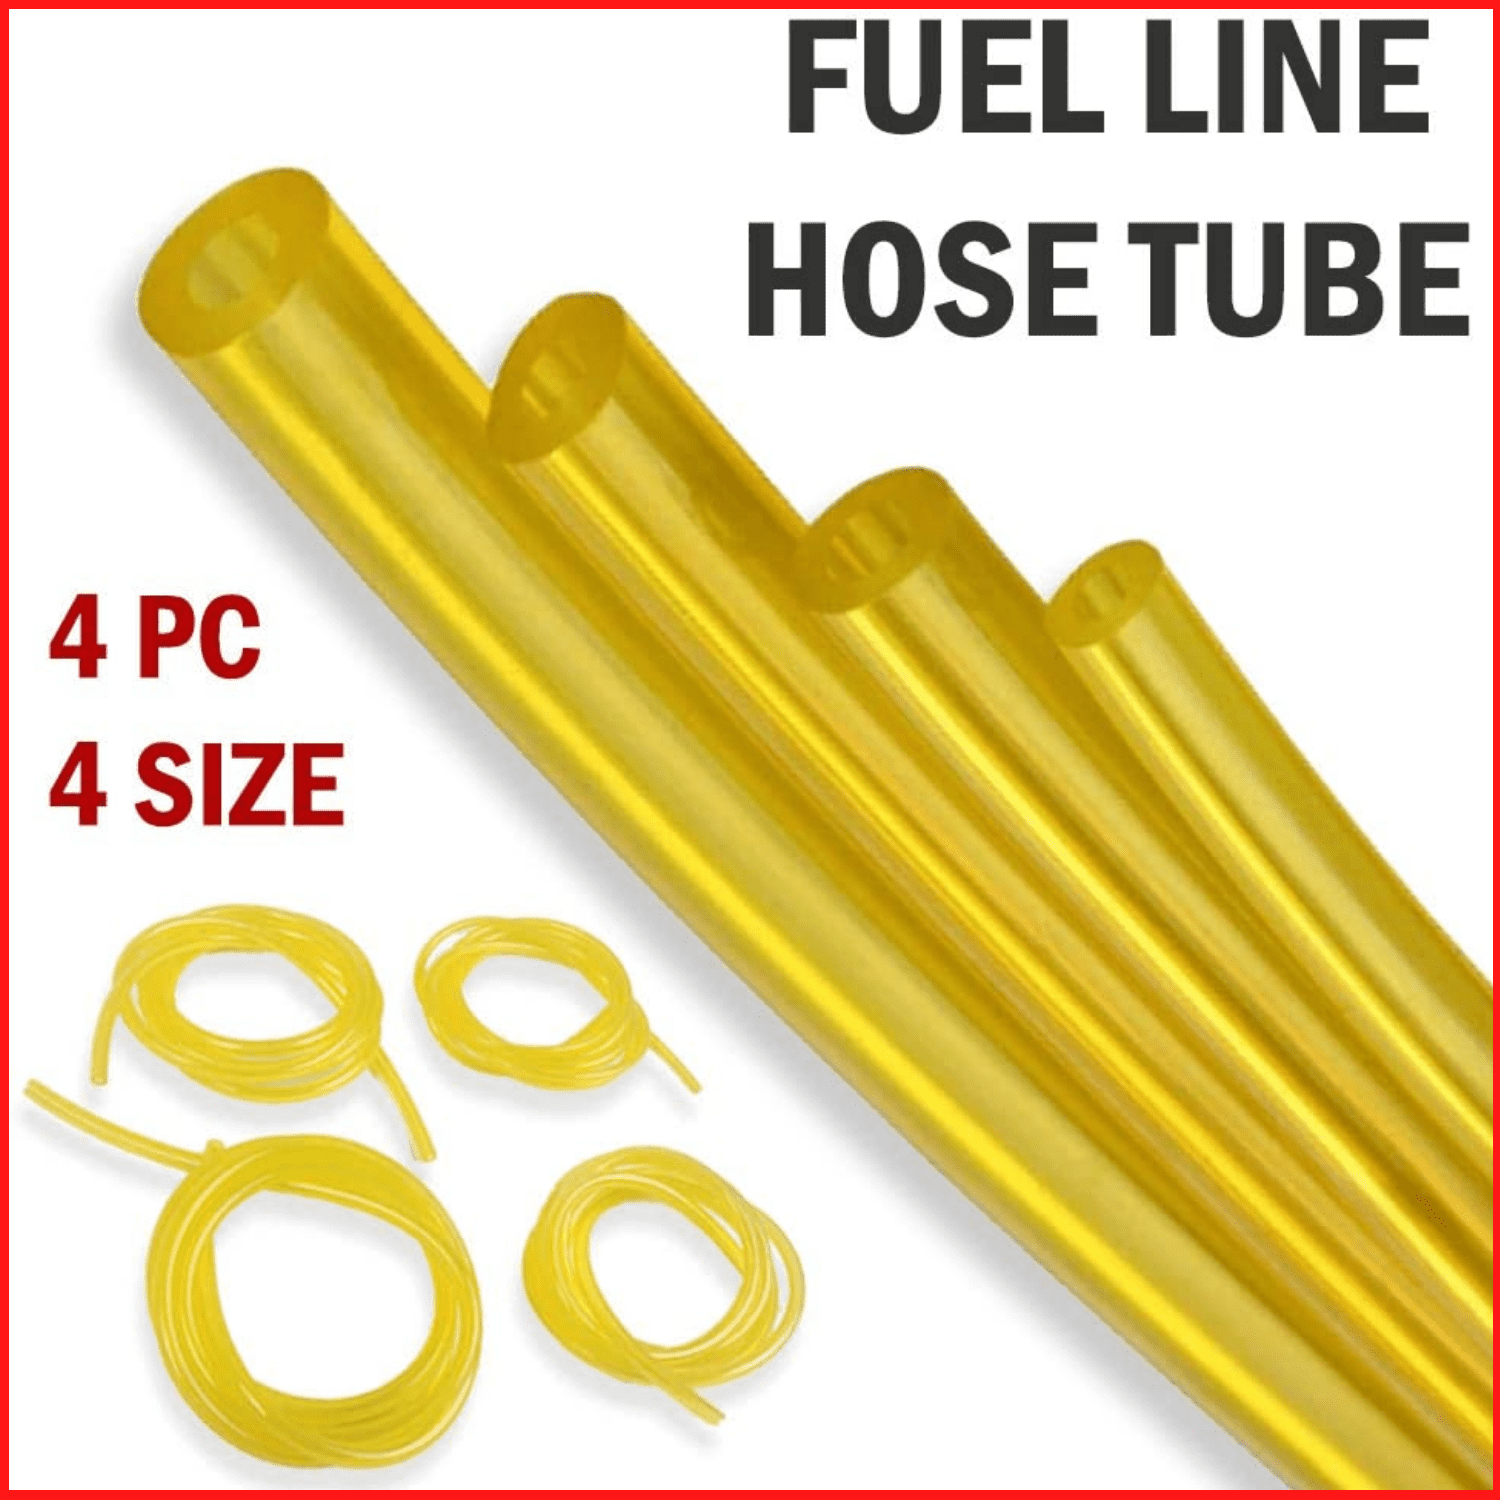 NEW 4 Petrol Fuel Line Hose Gas Pipe Tube For Trimmer Chainsaw Mower Blower Tool